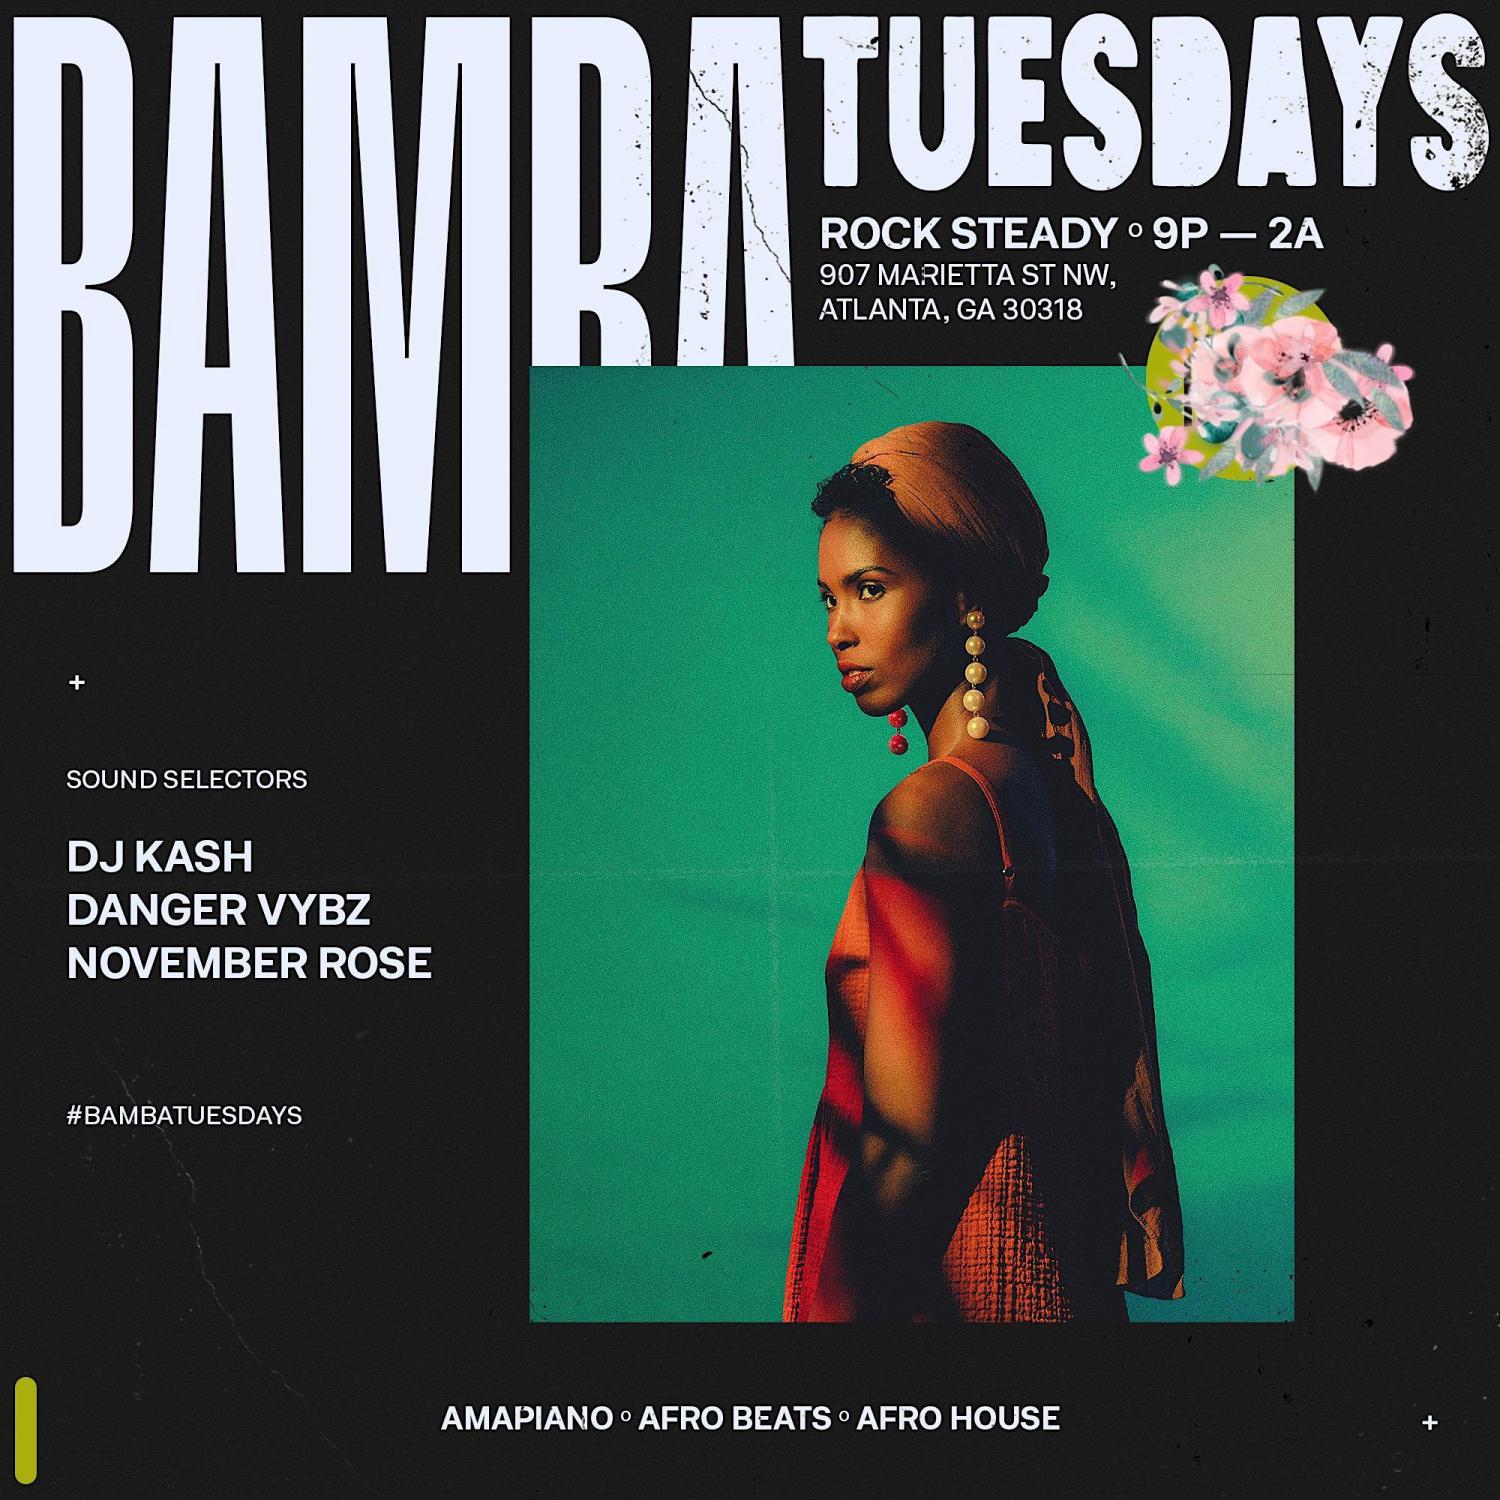 Bamba Tuesdays at Rocksteady
Tue Dec 27, 9:00 PM - Wed Dec 28, 2:00 AM
in 71 days